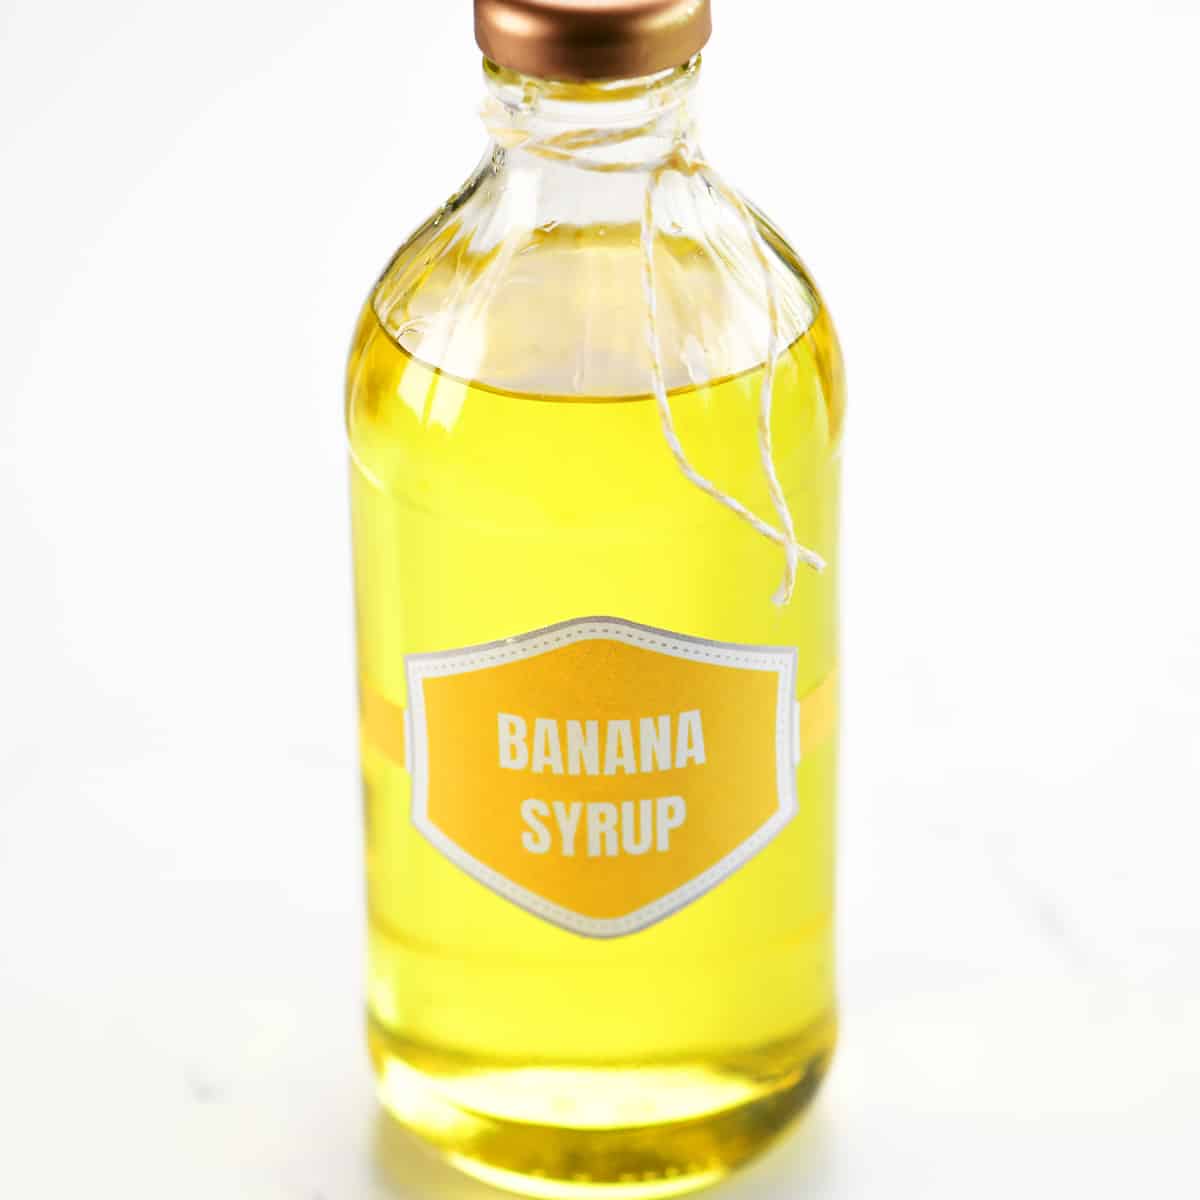 Banana syrup in a glass bottle.